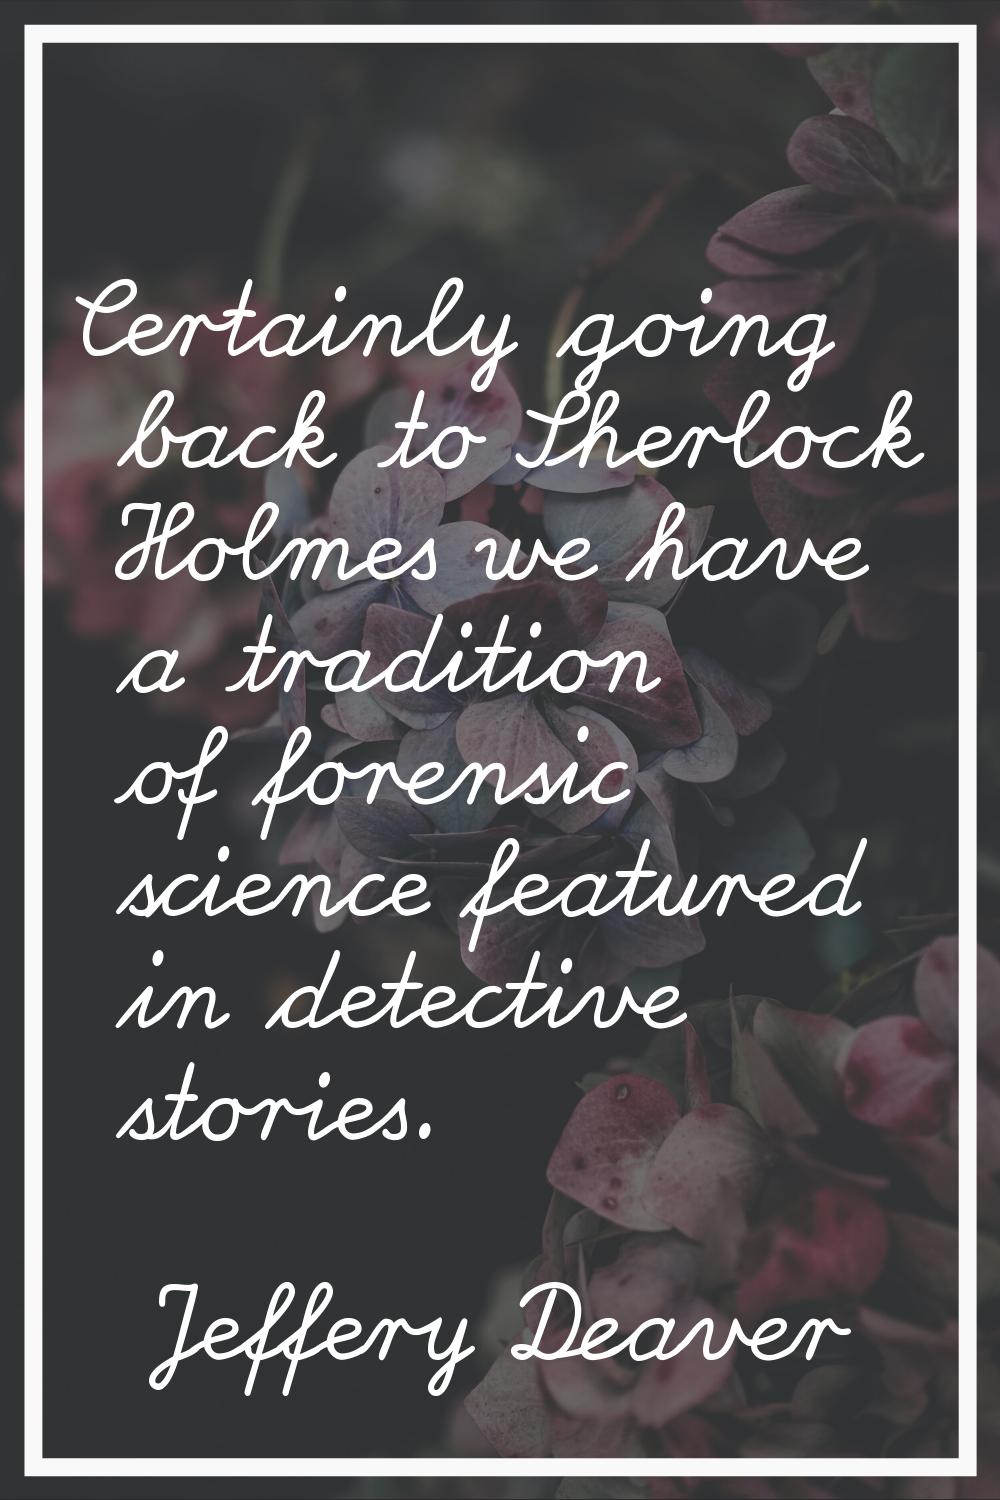 Certainly going back to Sherlock Holmes we have a tradition of forensic science featured in detecti